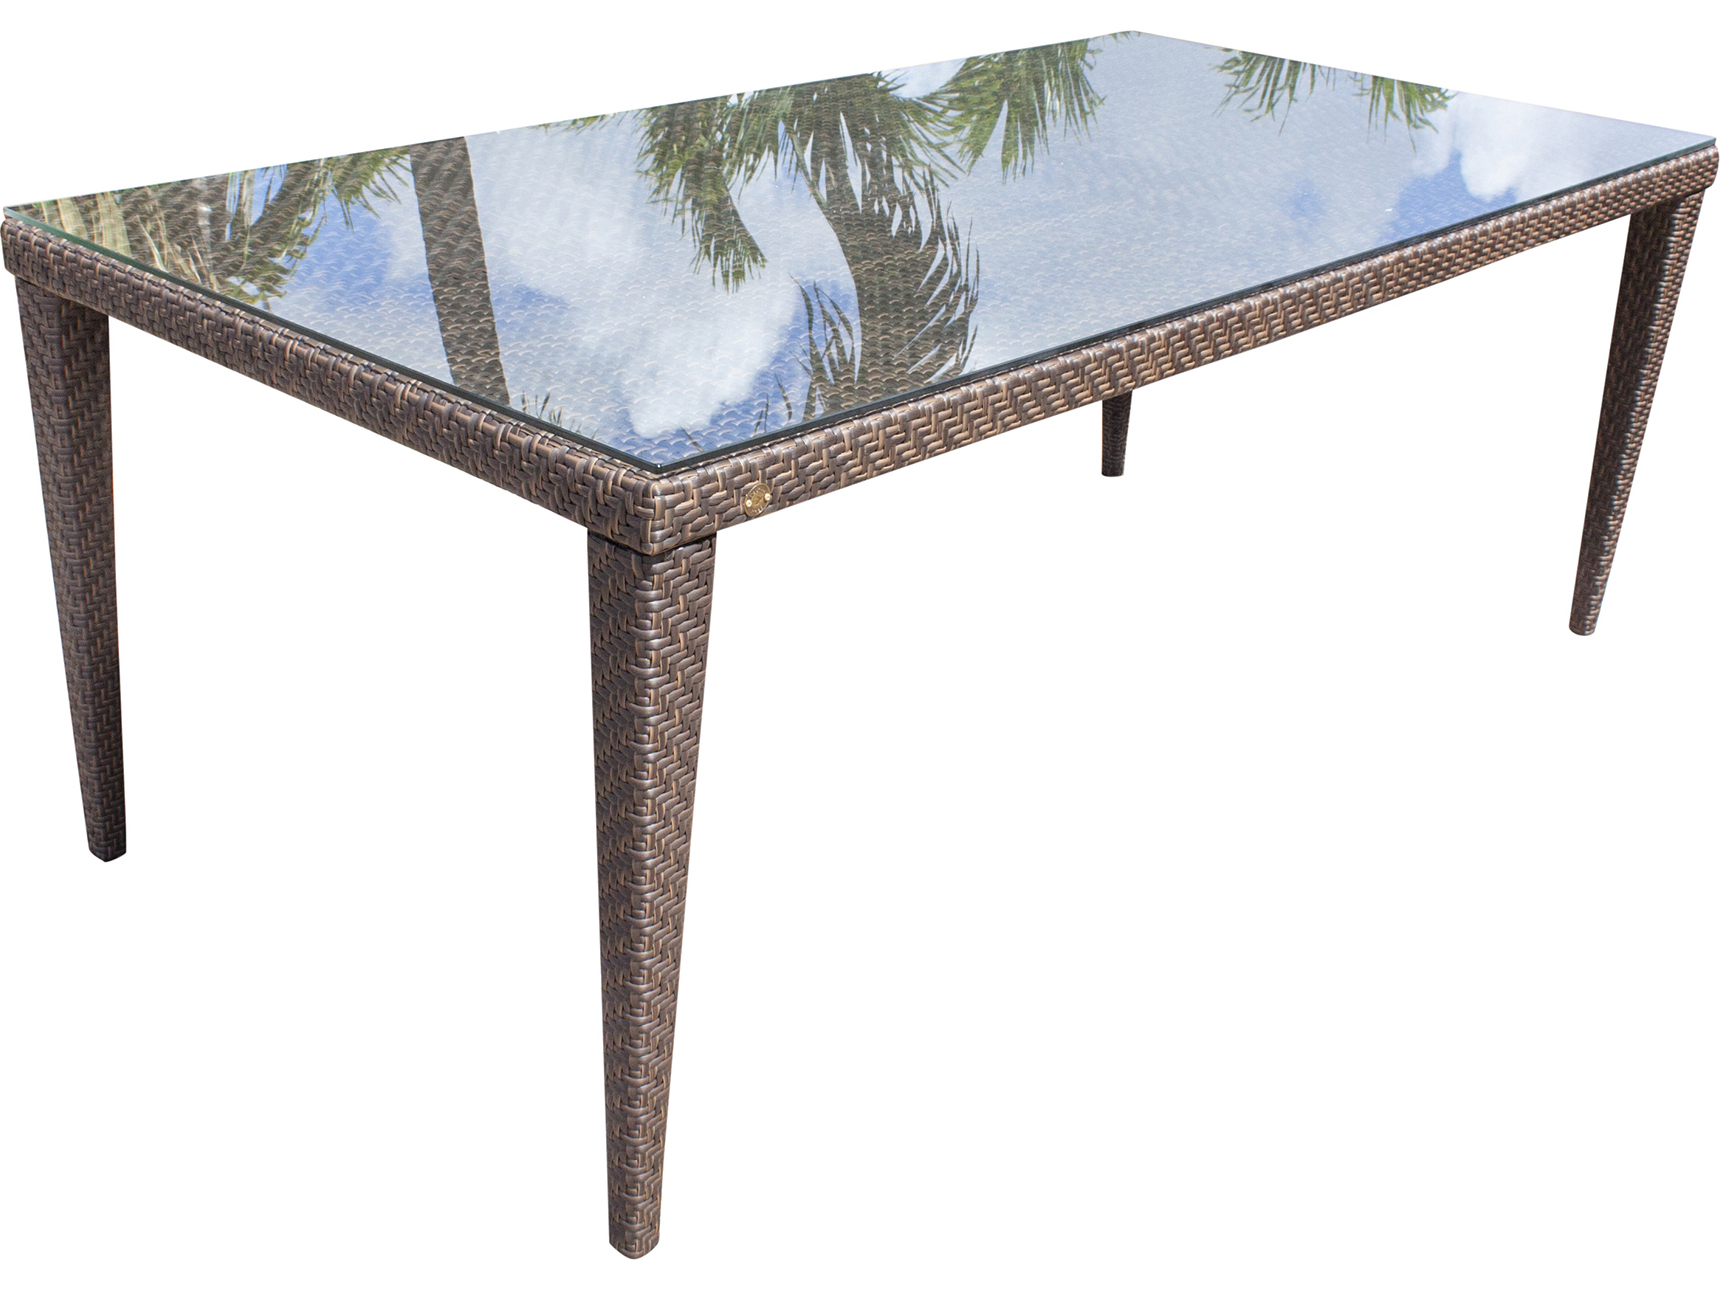 Hospitality Rattan Outdoor Soho Java, Glass Top Outdoor Dining Table For 6